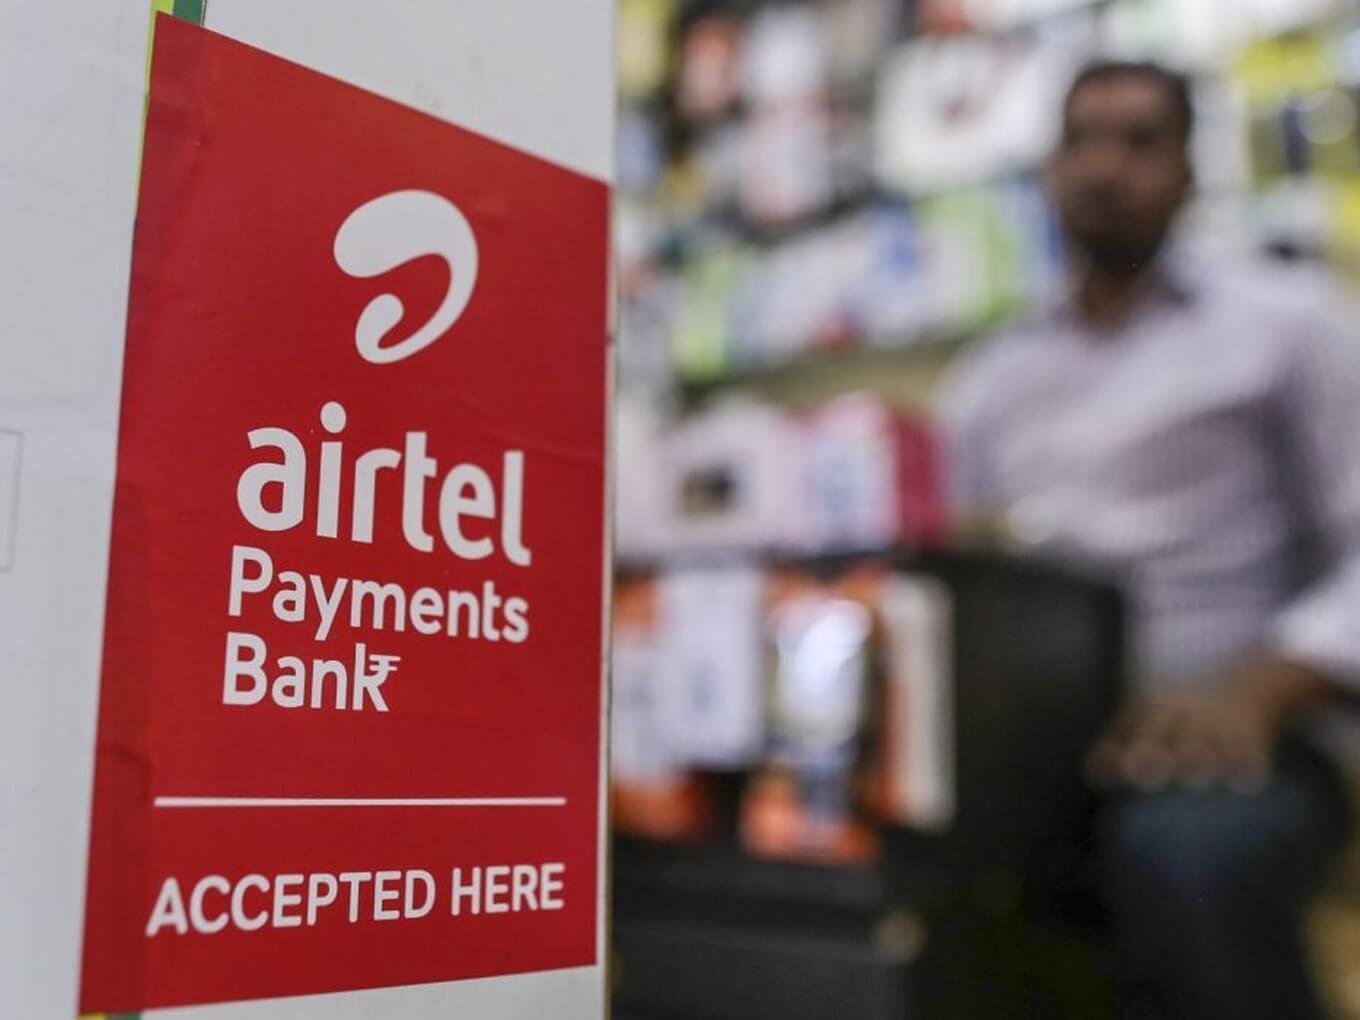 Airtel Payments Bank Files For Another Loss, Despite Revenue Hike